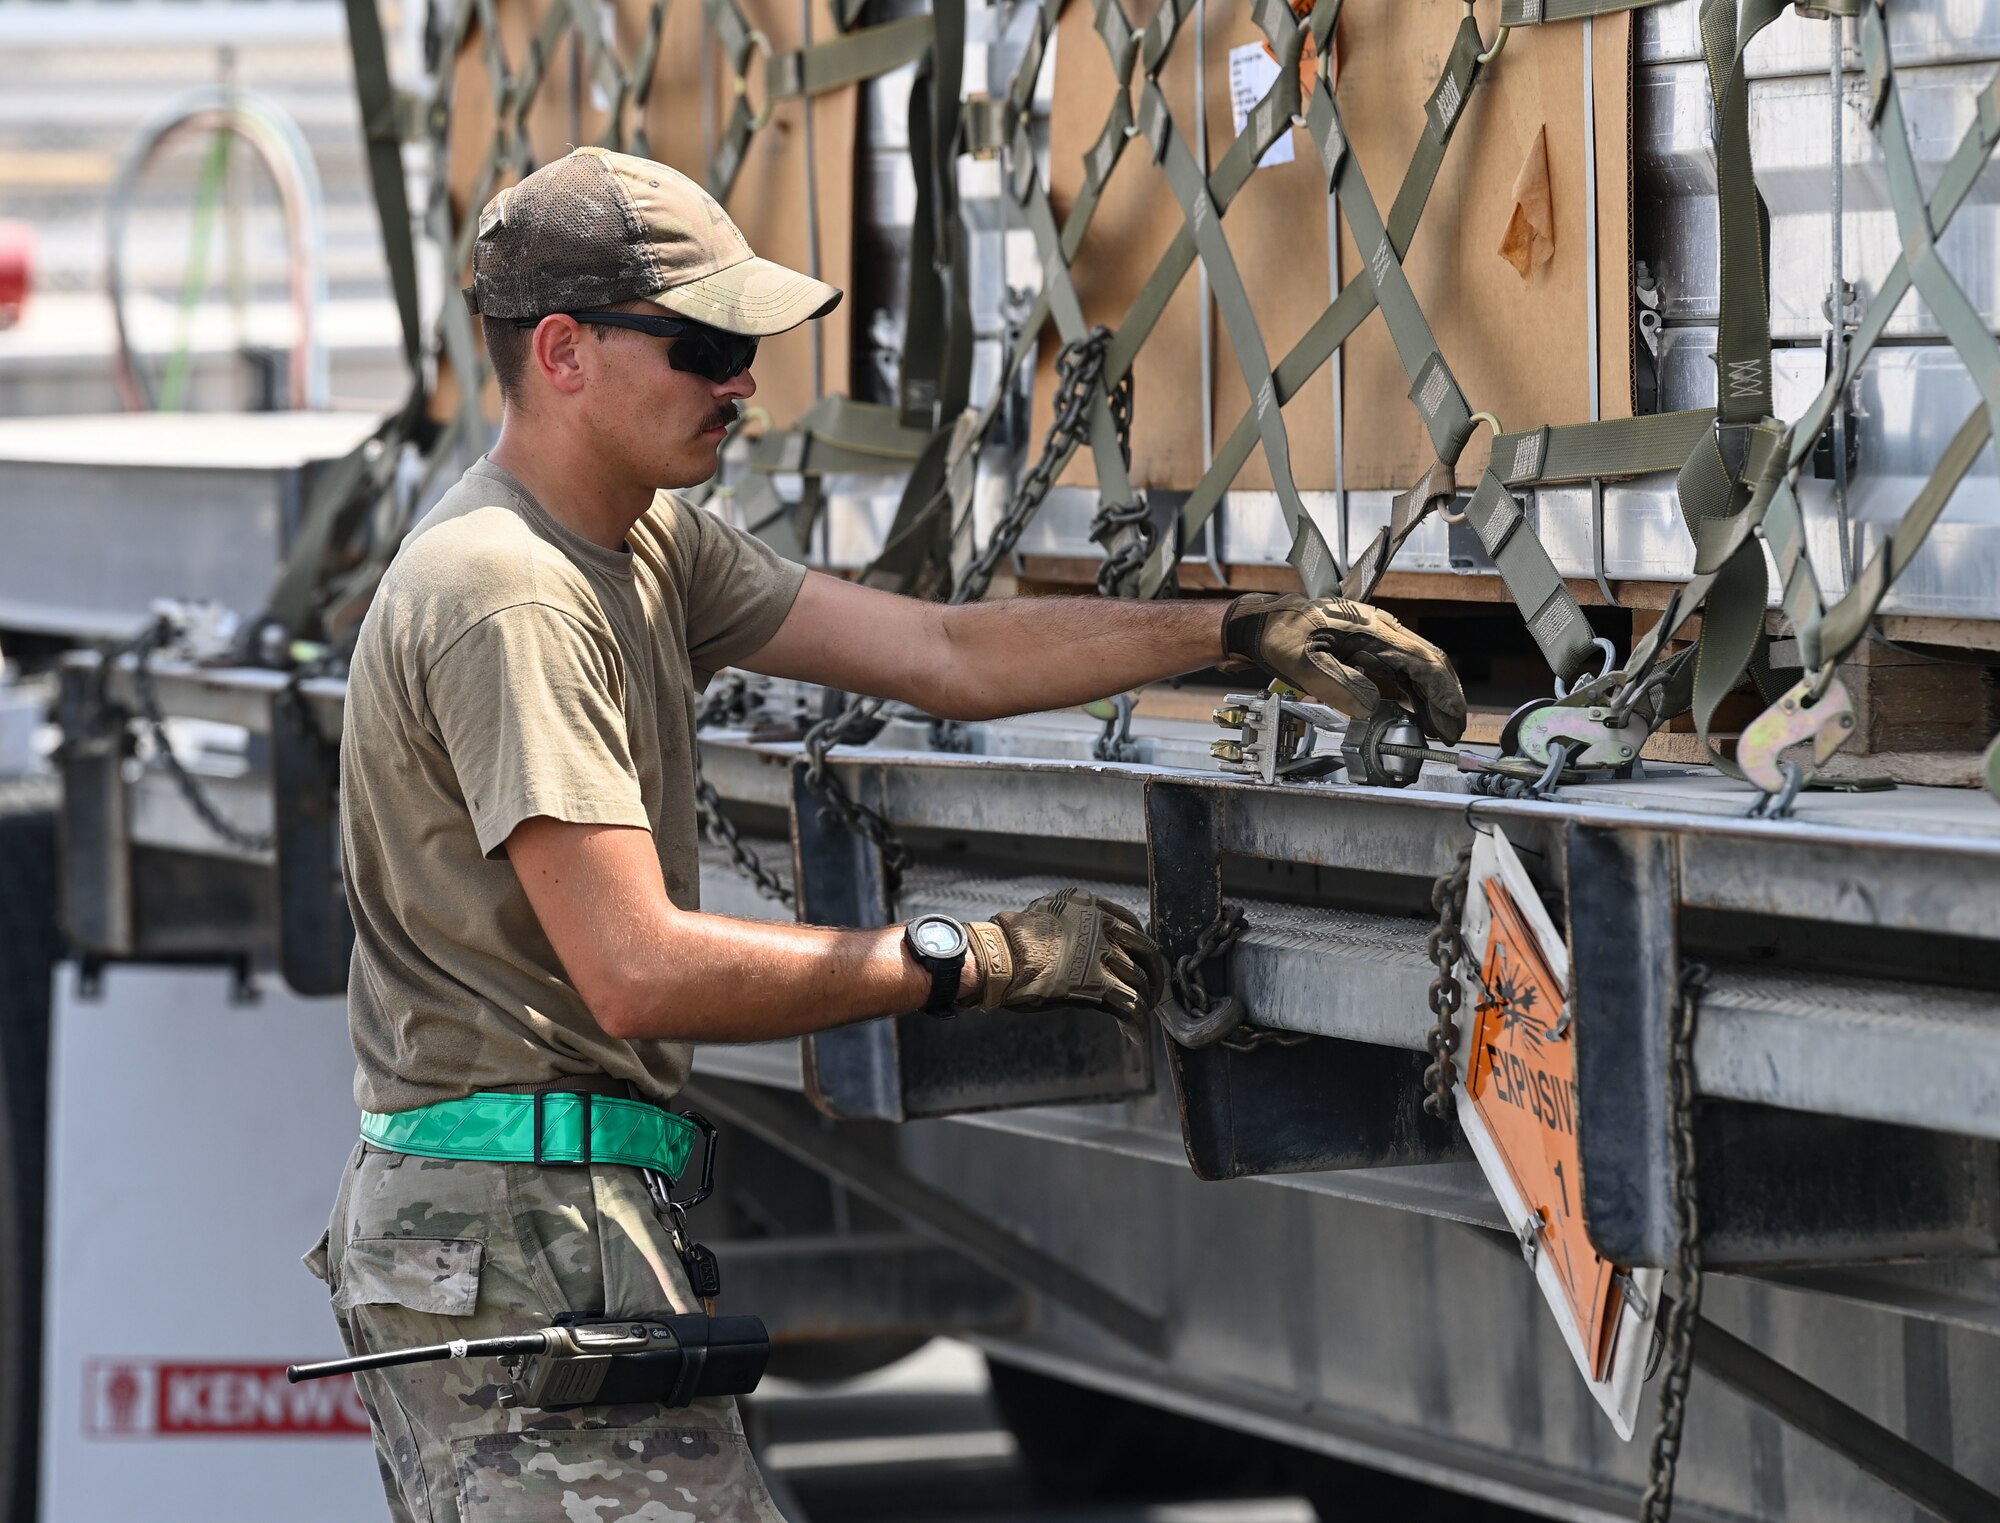 U.S. Air Force Staff Sgt. Taylor Underwood, 379th Expeditionary Readiness Squadron Ground Transport, unties a pallet of munitions Sept. 20, 2022 at Al Udeid Air Base, Qatar.  The 379th ERLS ground transport team moved munitions from the munitions storage area to a staging area where they were later loaded onto a C-17 Globemaster III aircraft. (U.S. Air National Guard photo by Master Sgt. Michael J. Kelly)